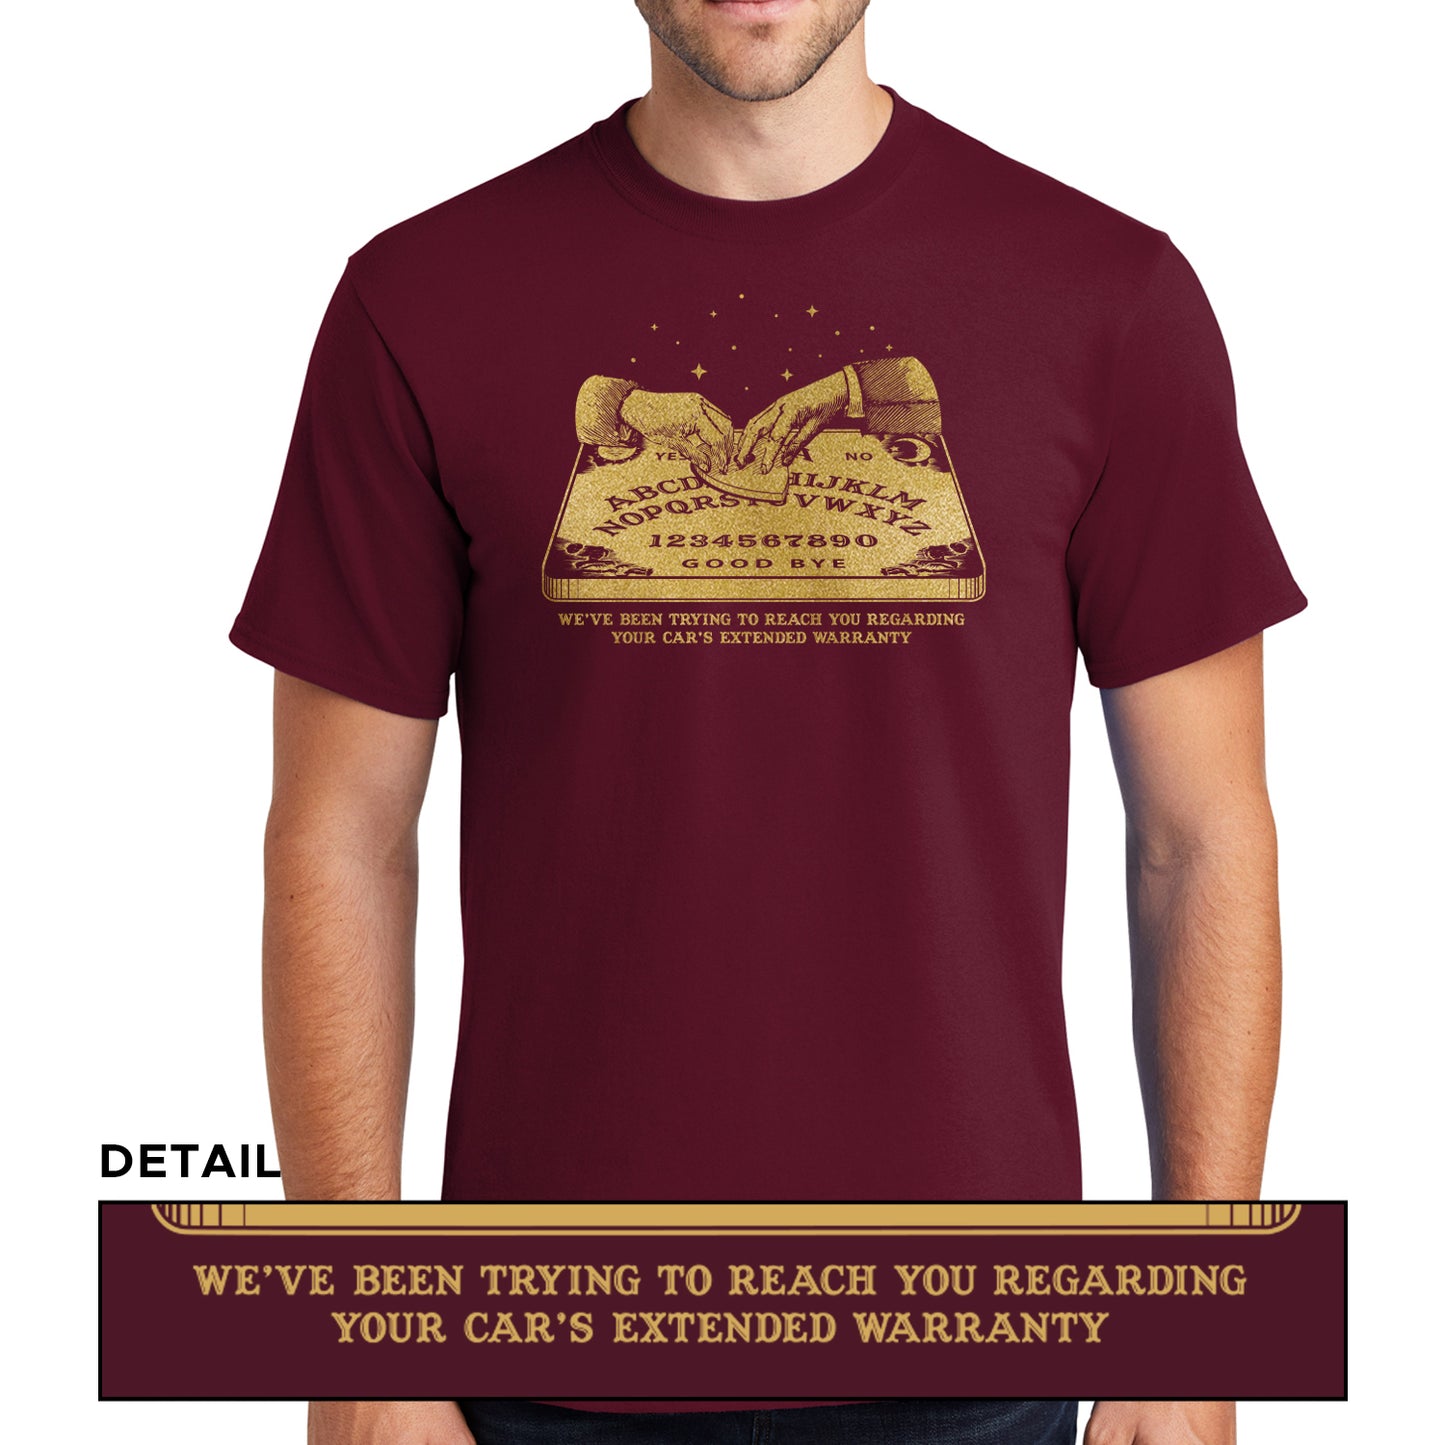 A male model wearing a maroon T-shirt, with a gold color image of two hands over a Ouija board. Under the board is gold text saying "We've been trying to reach you regarding your car's extended warranty." A second, smaller image is at the bottom, showing a close-up of the text.